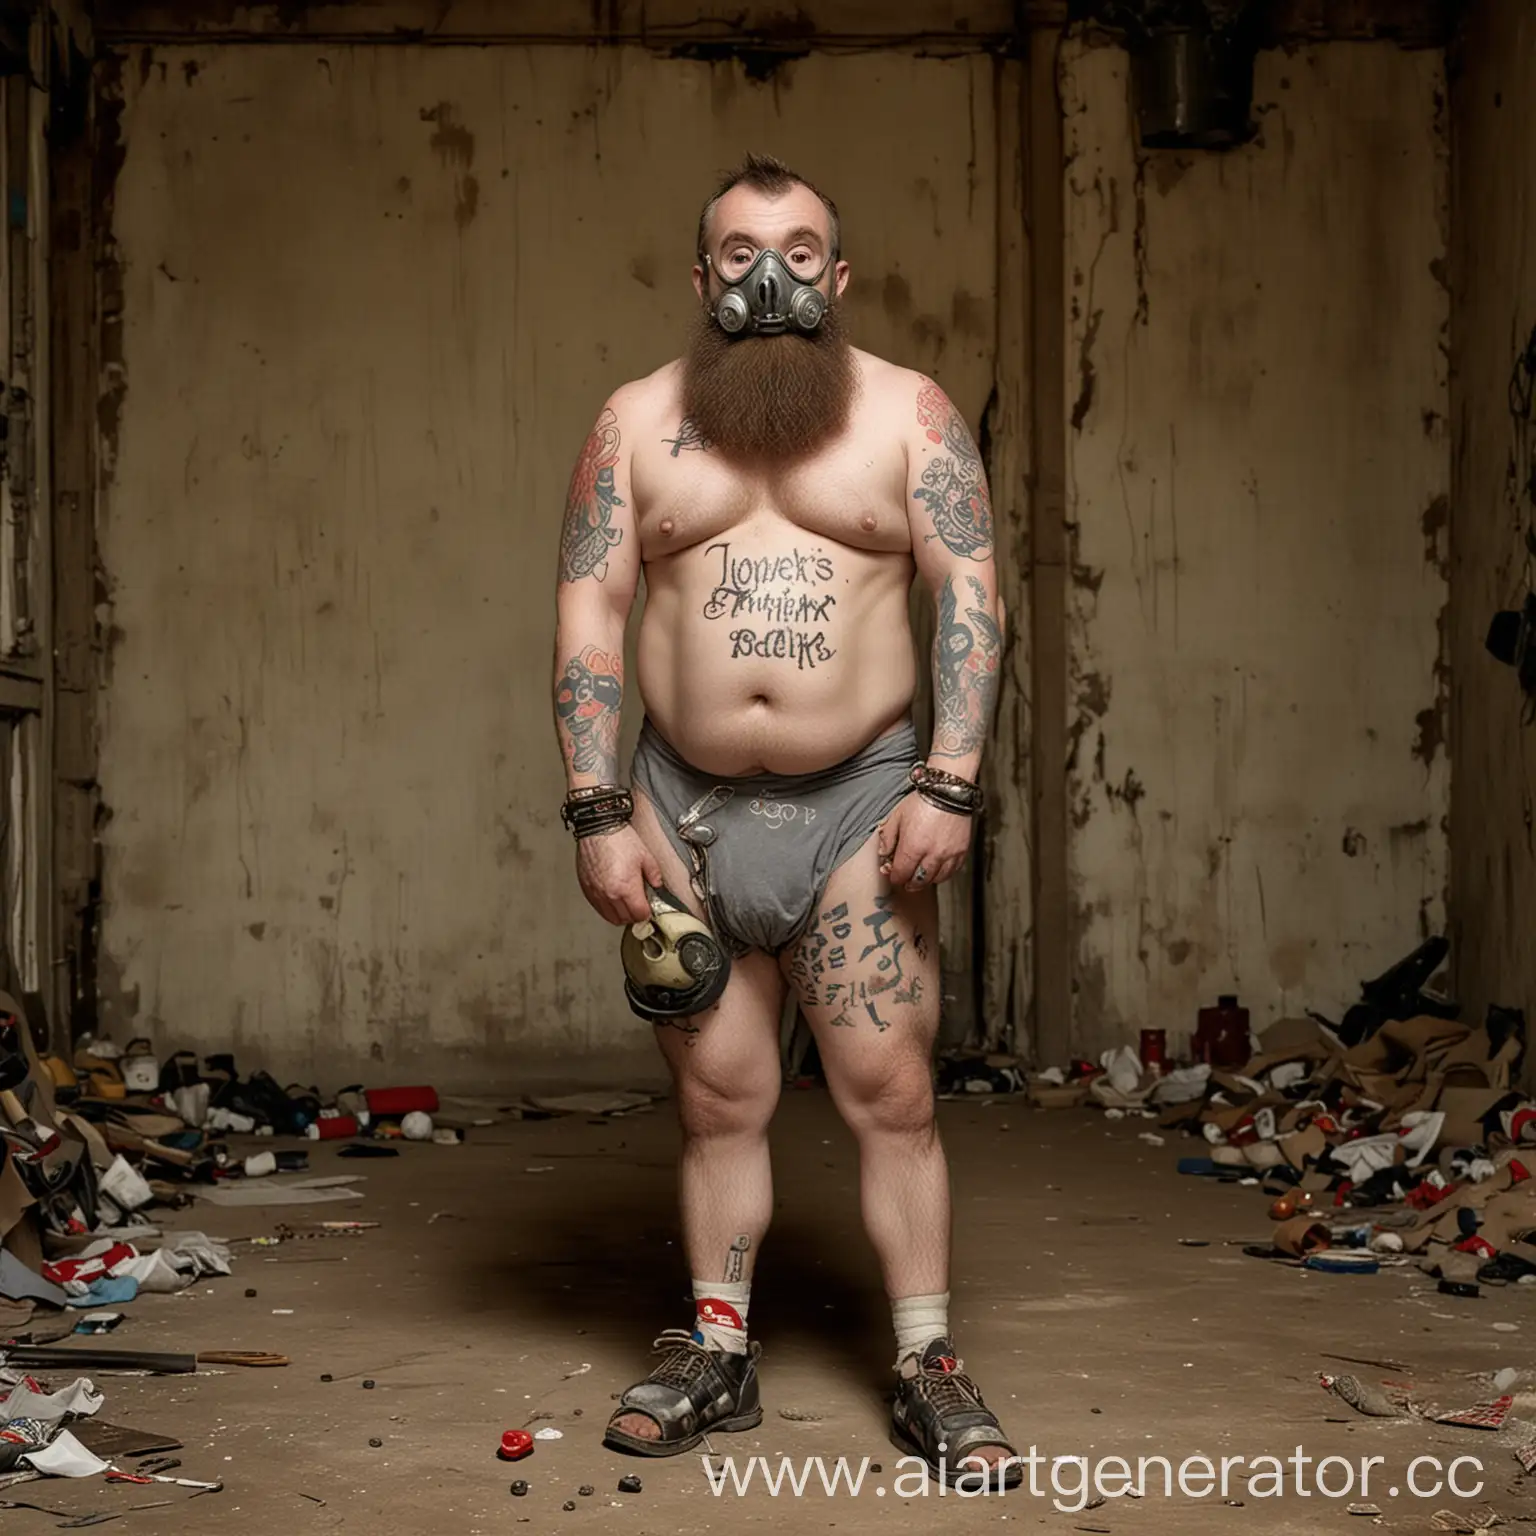 Dwarf-in-Abandoned-Building-Amid-Firecrackers-and-Gas-Masks-Holding-Twix-and-Snickers